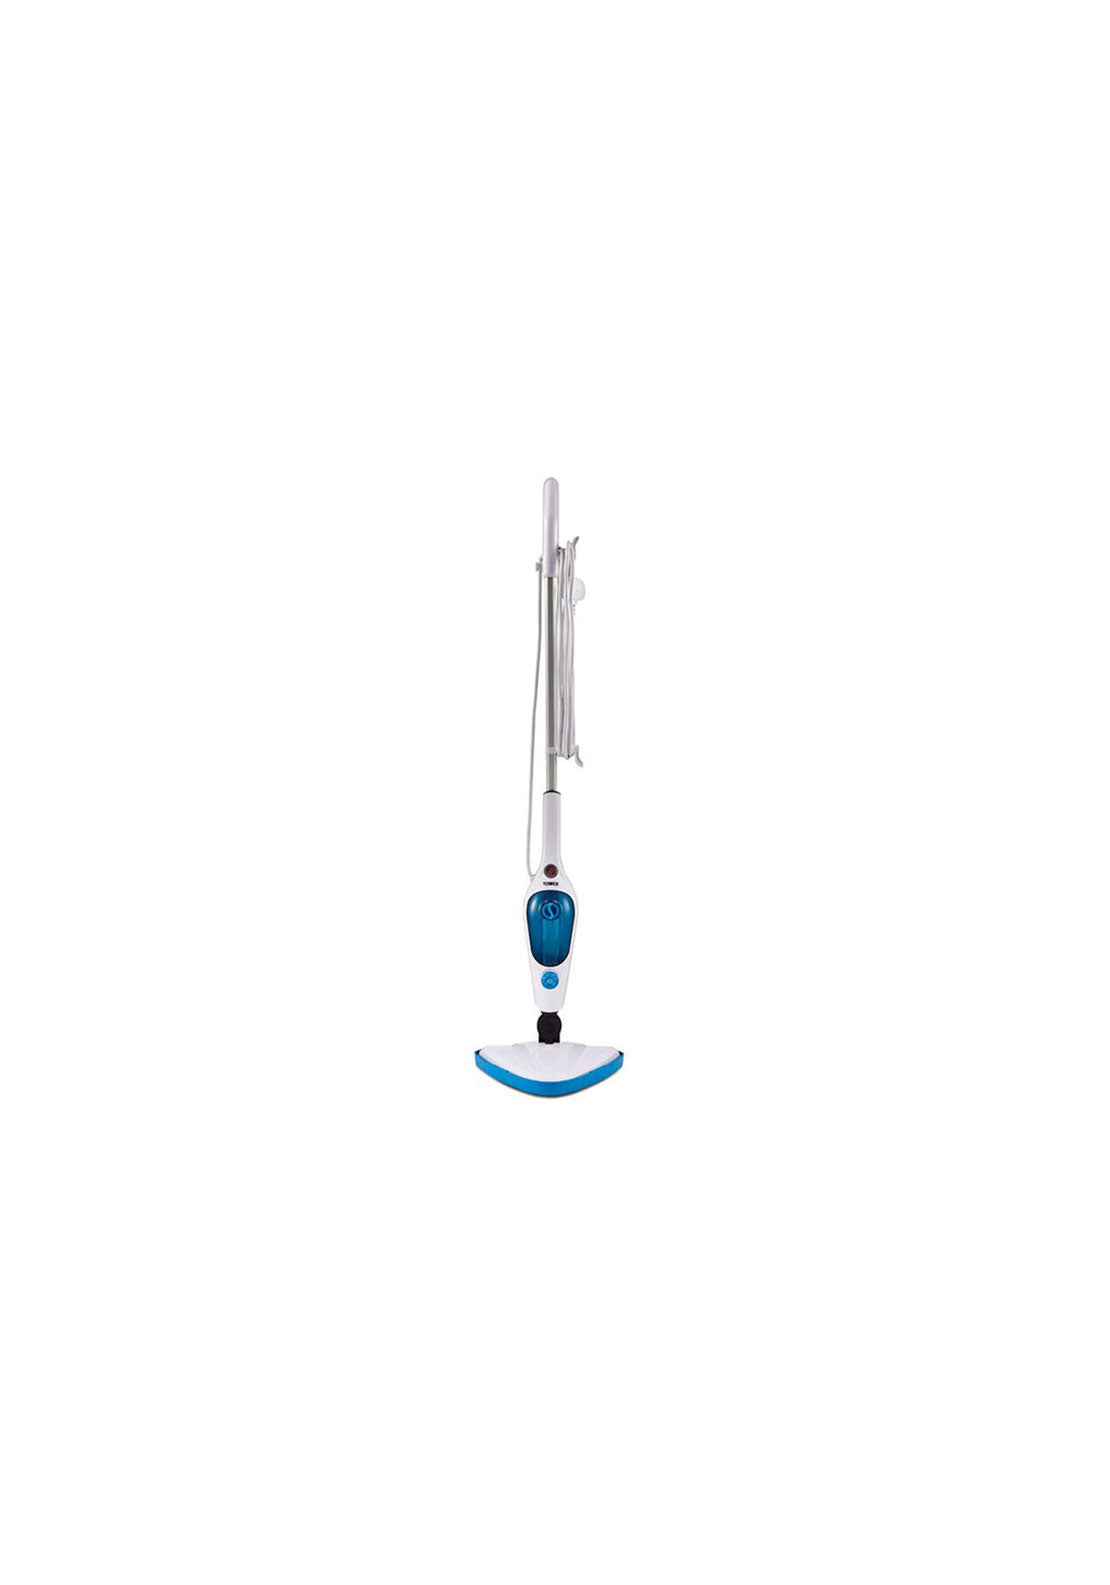 Tower TSM16 Multi-Functional Steam Mop | T132002 7 Shaws Department Stores